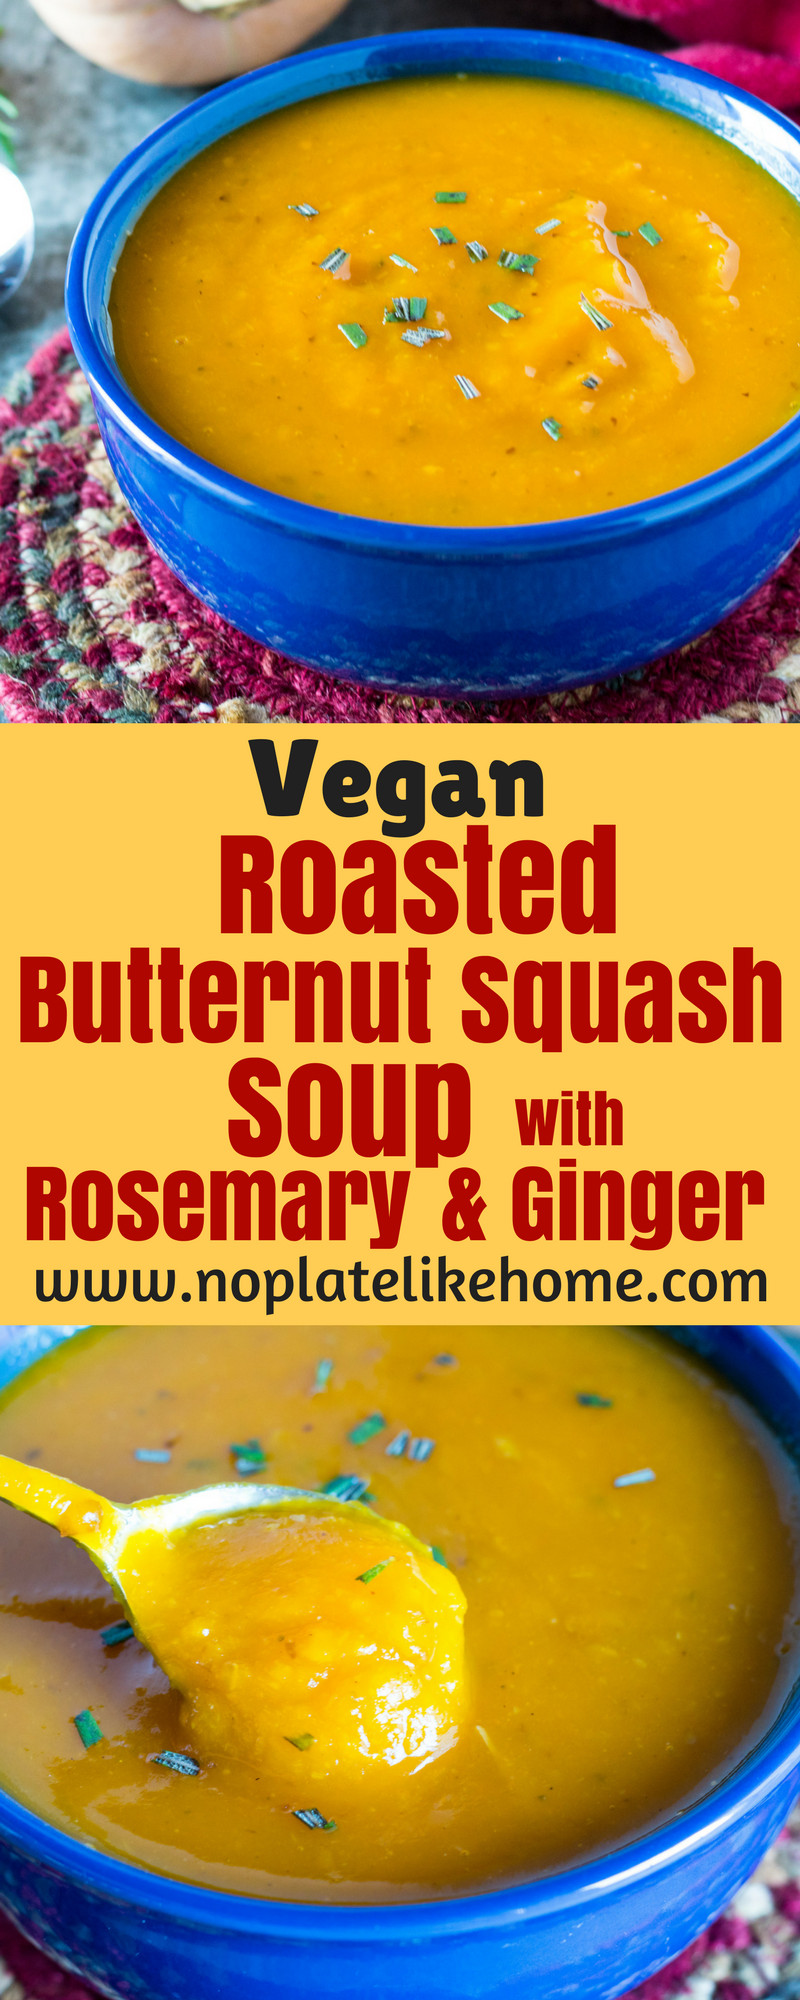 Vegan Butternut Squash Soup
 Easy Roasted Butternut Squash Soup with Rosemary and